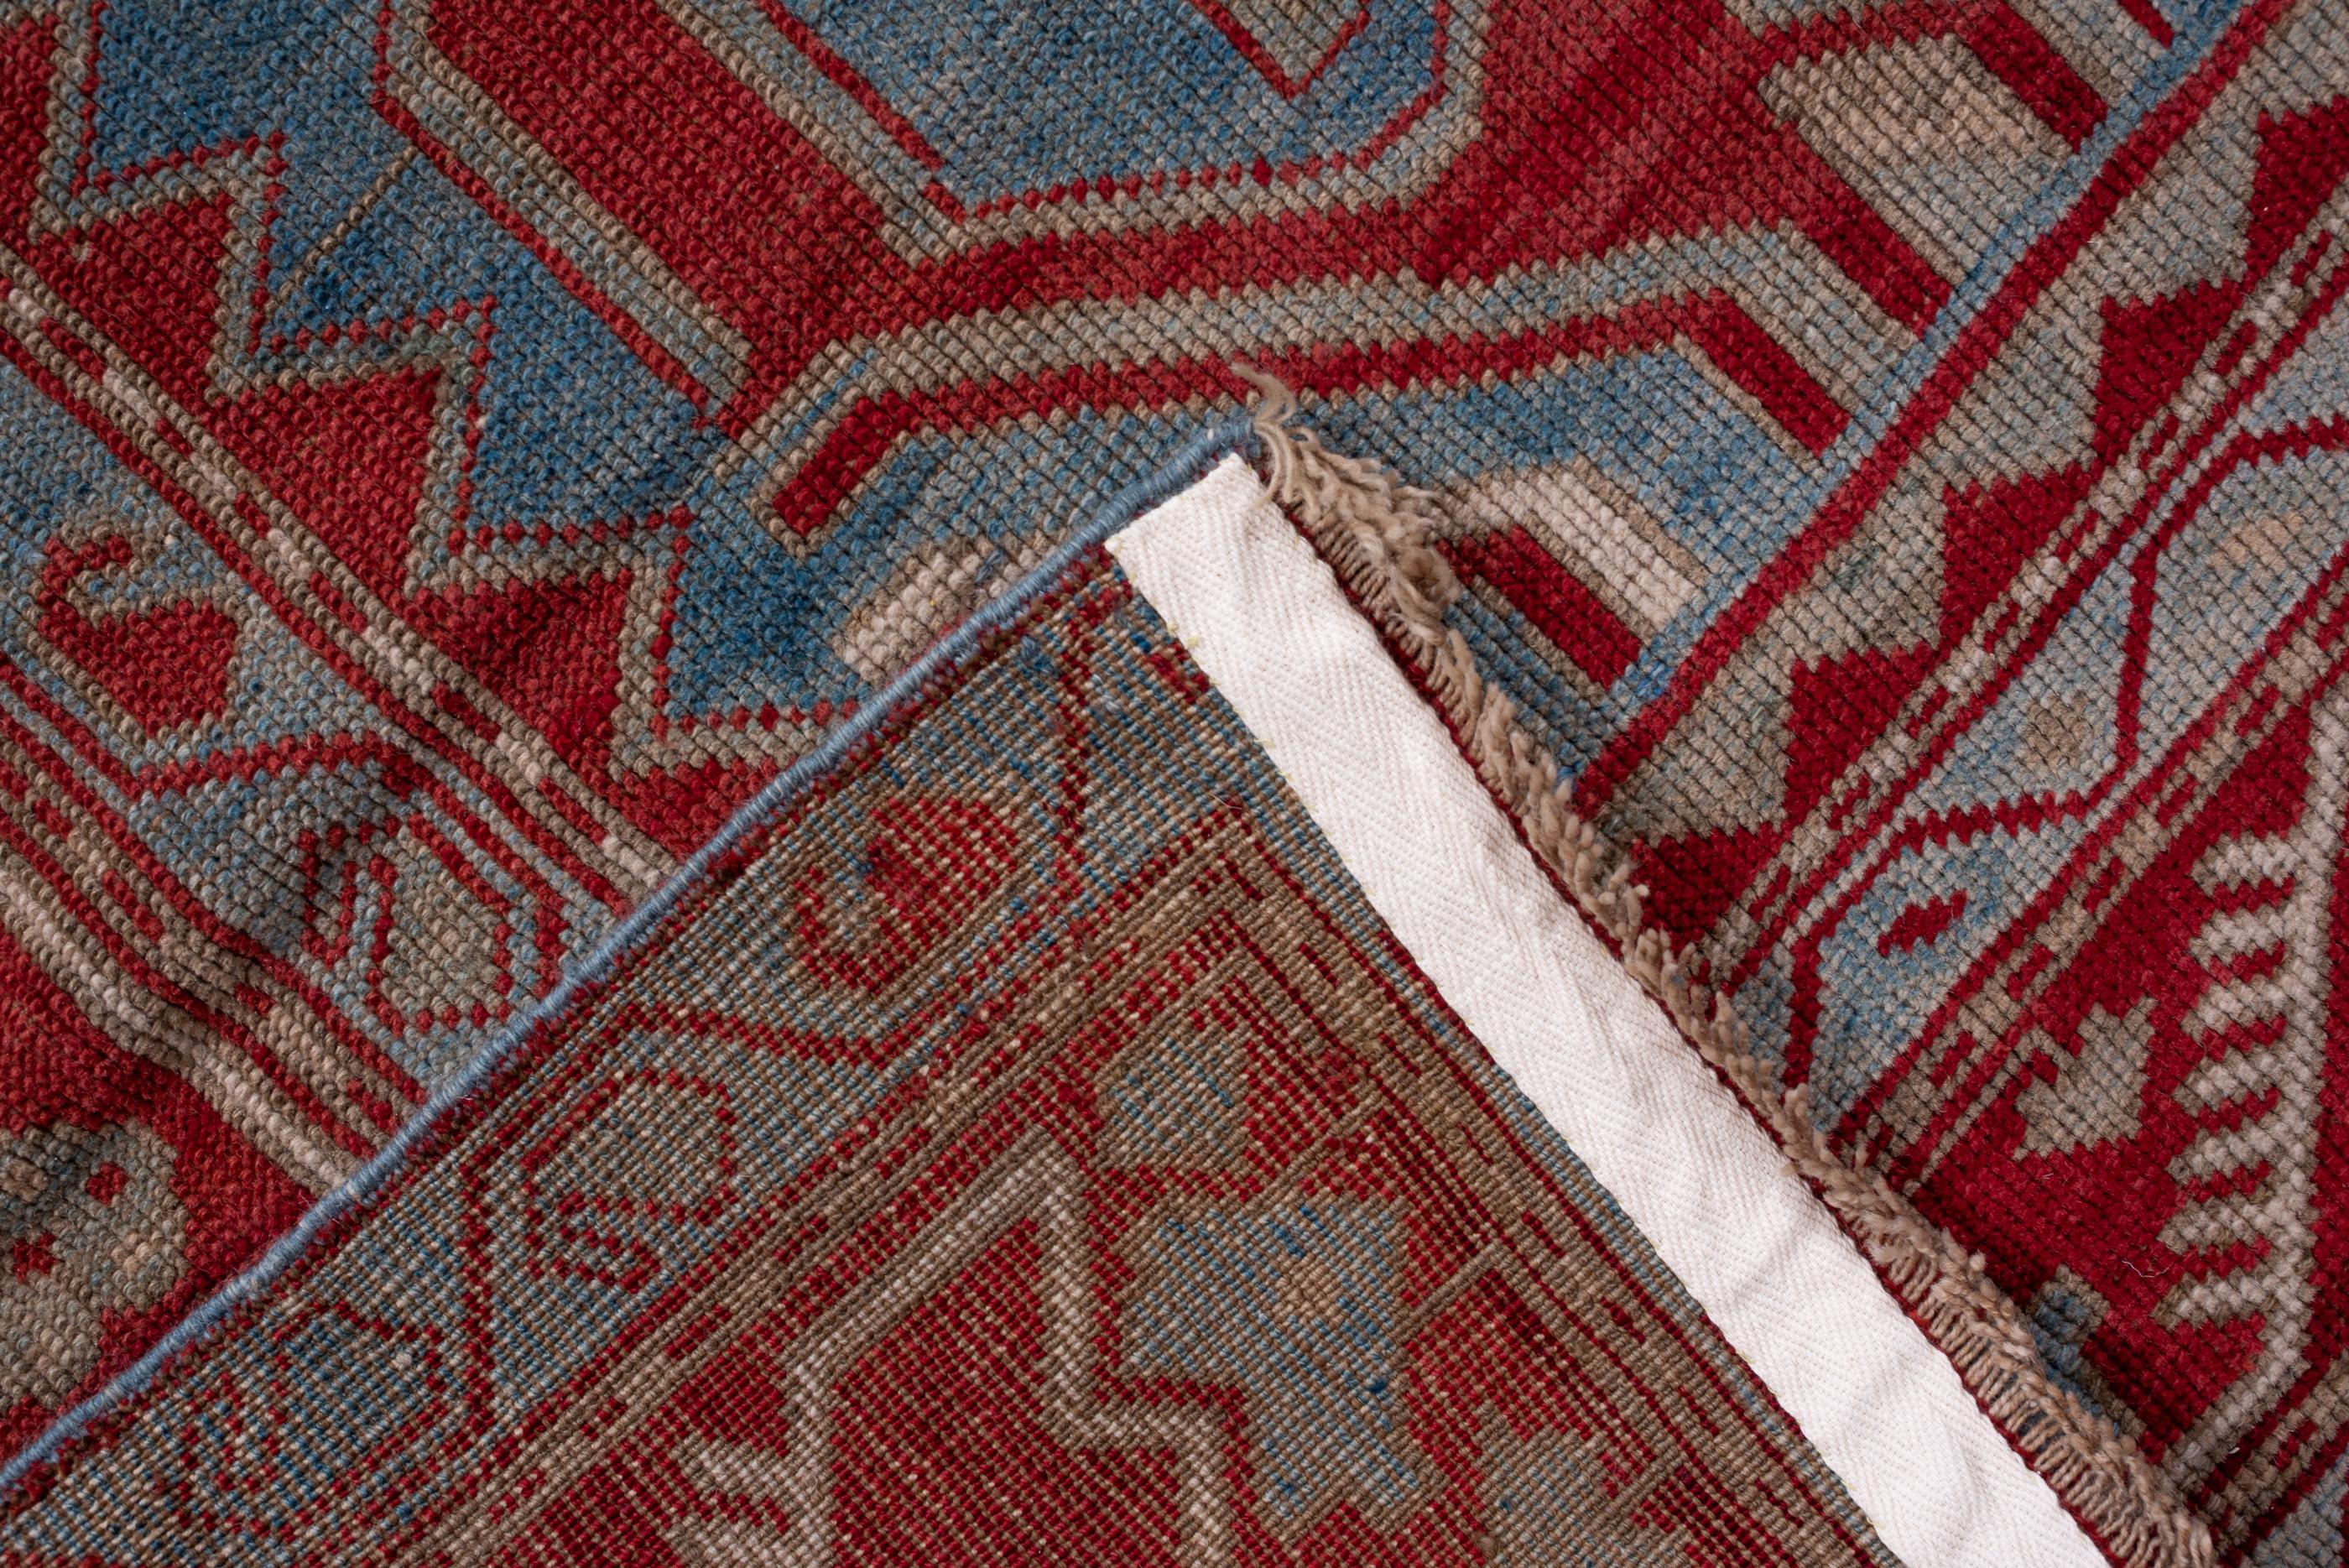 20th Century Antique Kazak Rug with Bold Red Border and Blue Field